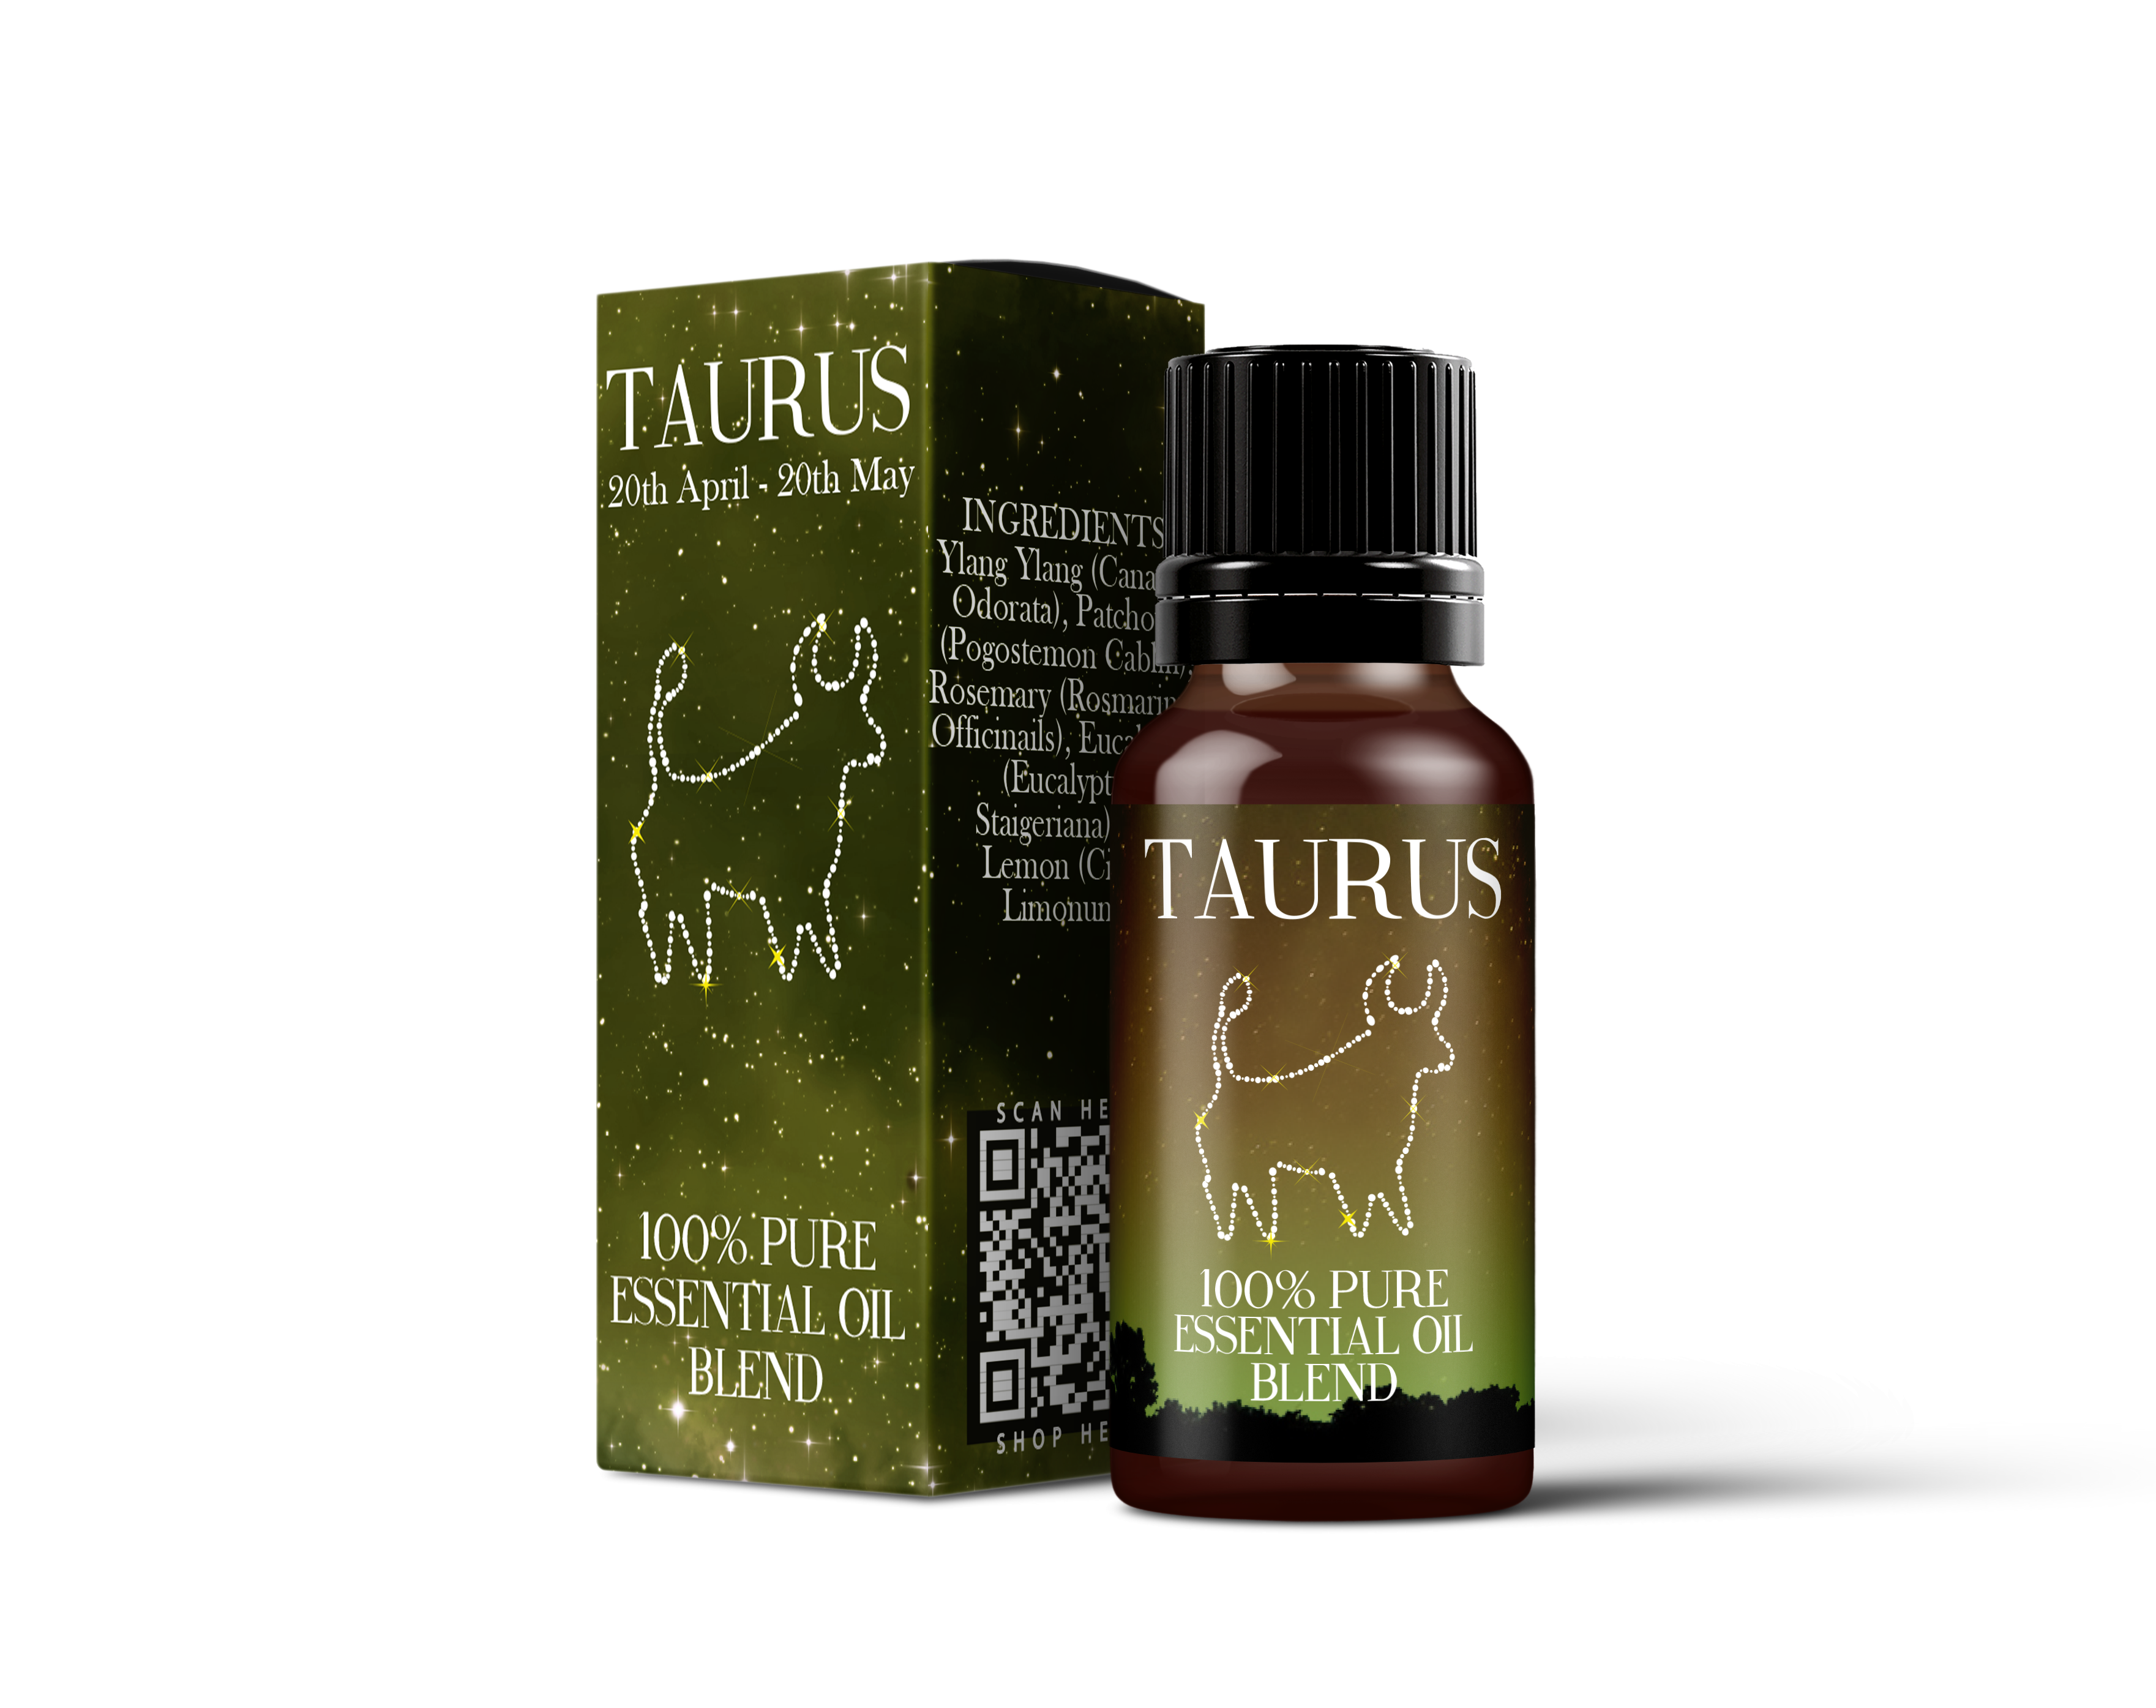 Image of Taurus - Zodiac Sign Astrology Essential Oil Blend